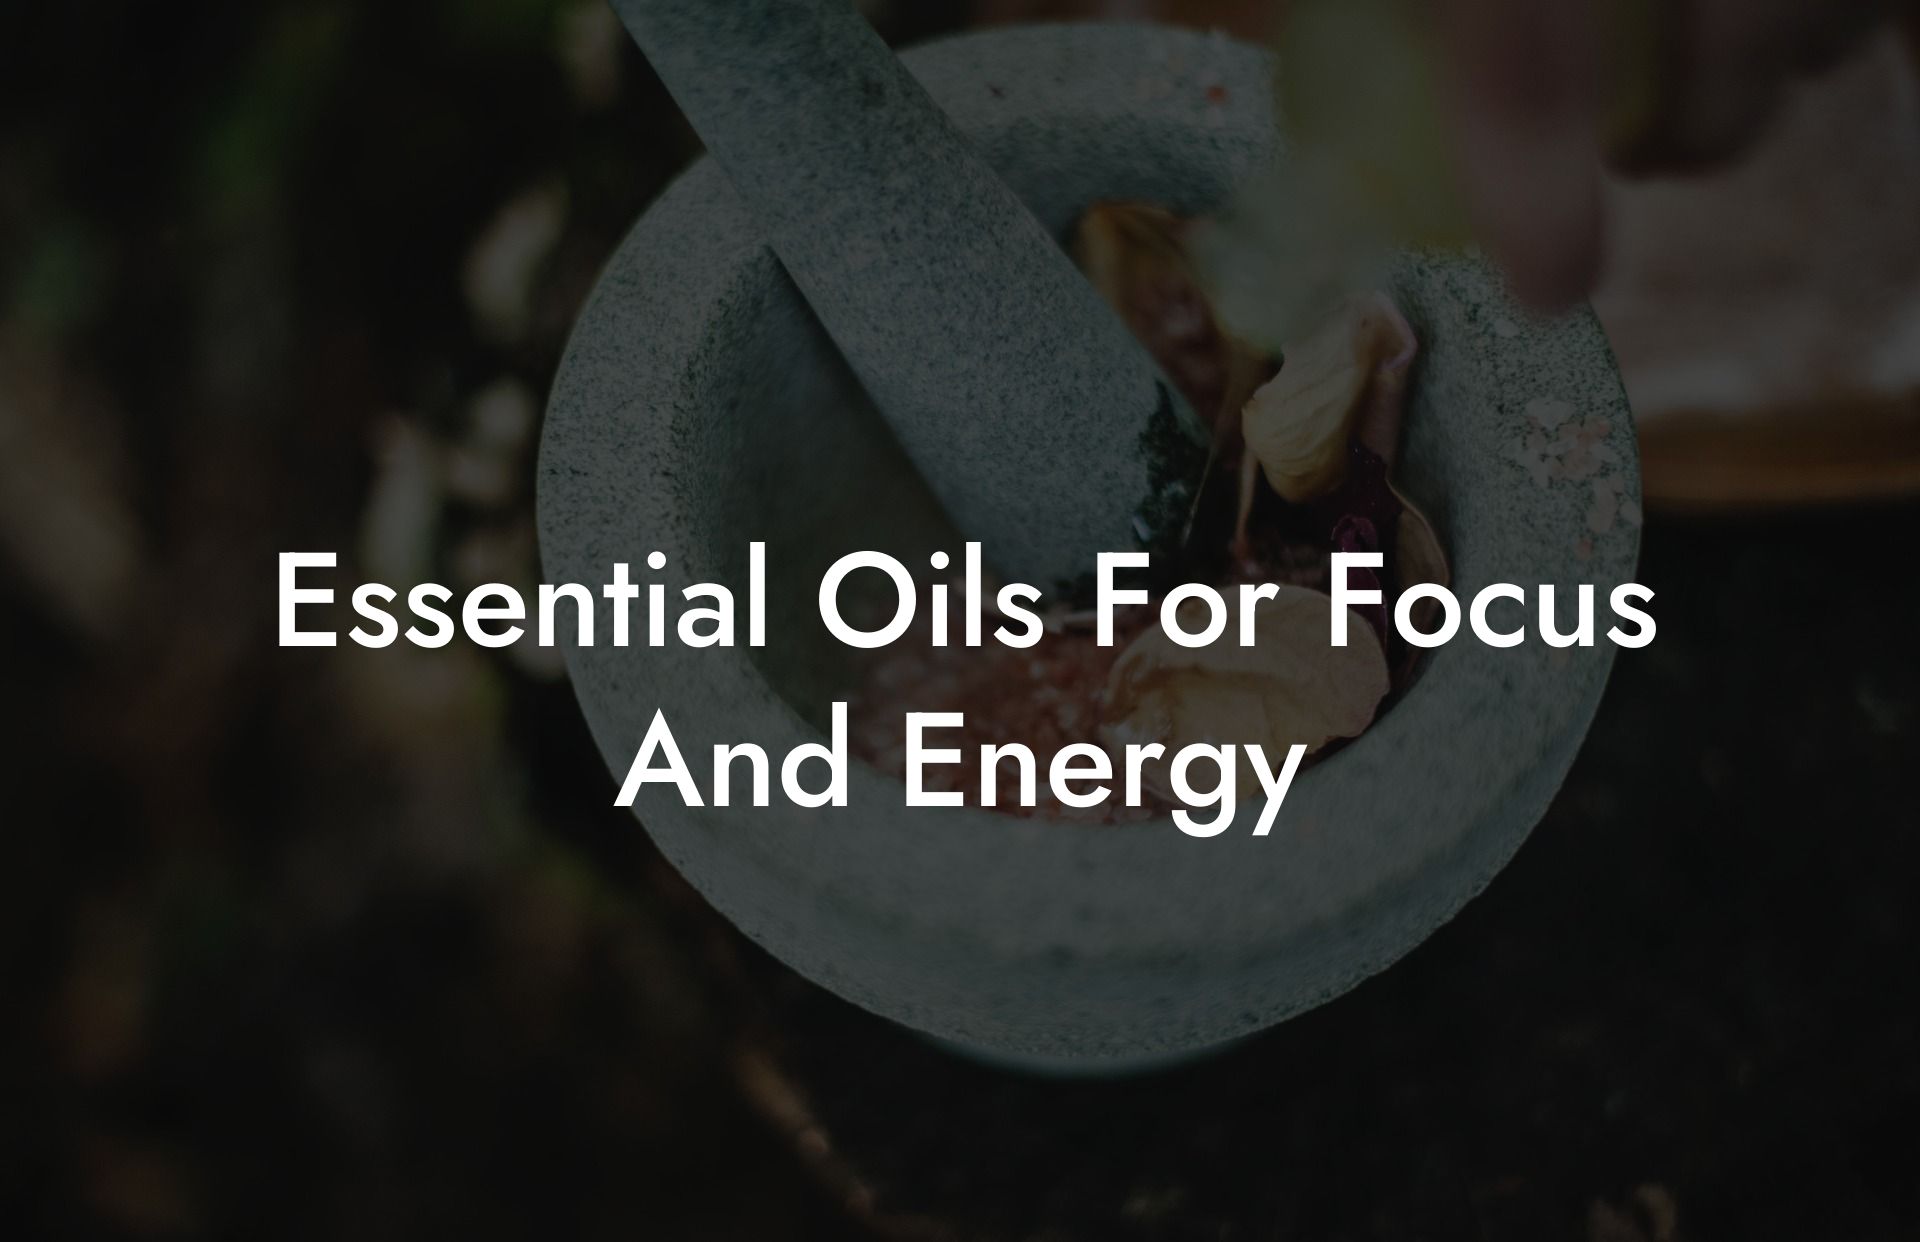 Essential Oils For Focus And Energy